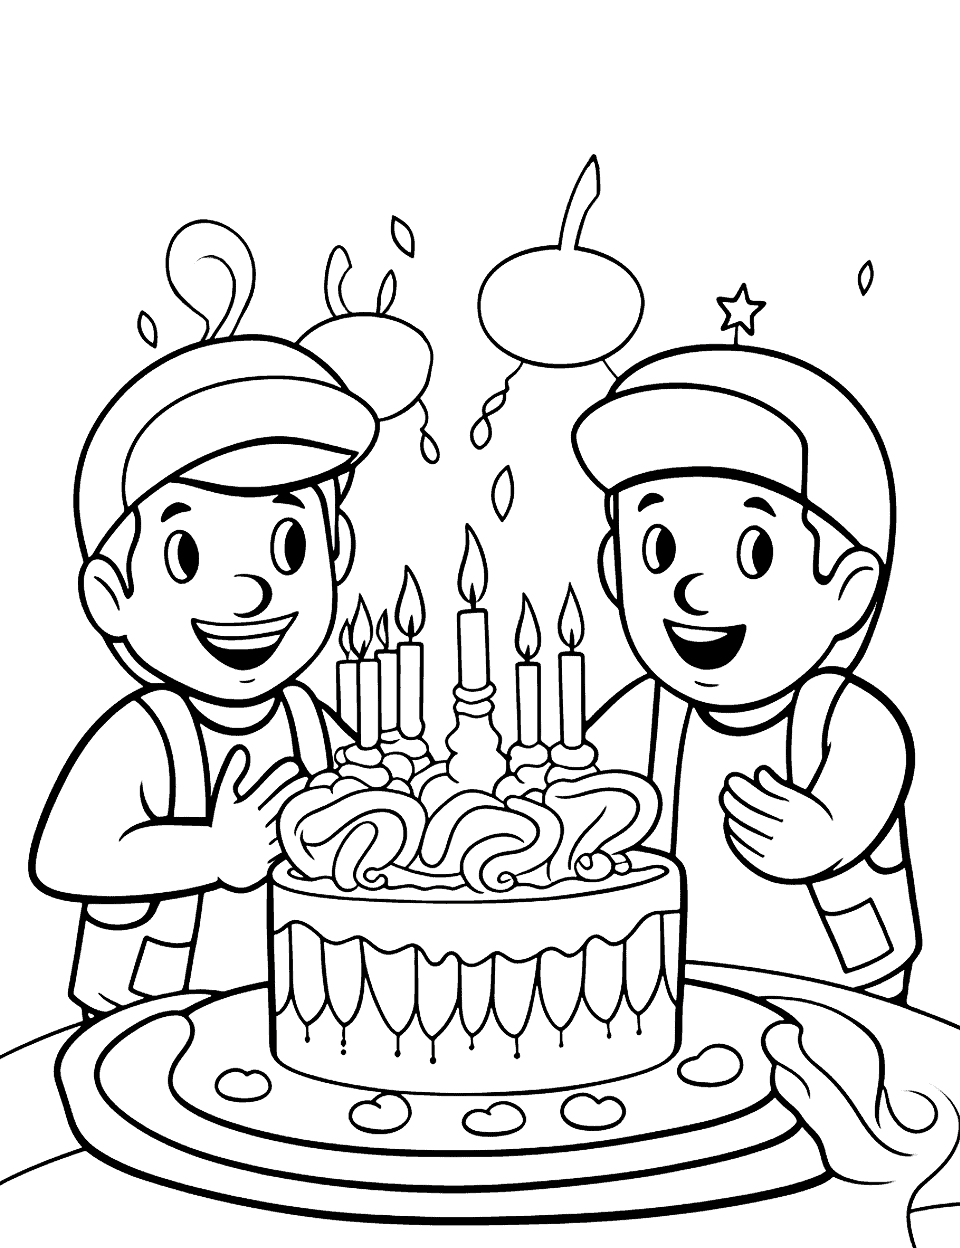 Printable happy birthday coloring pages for kids free